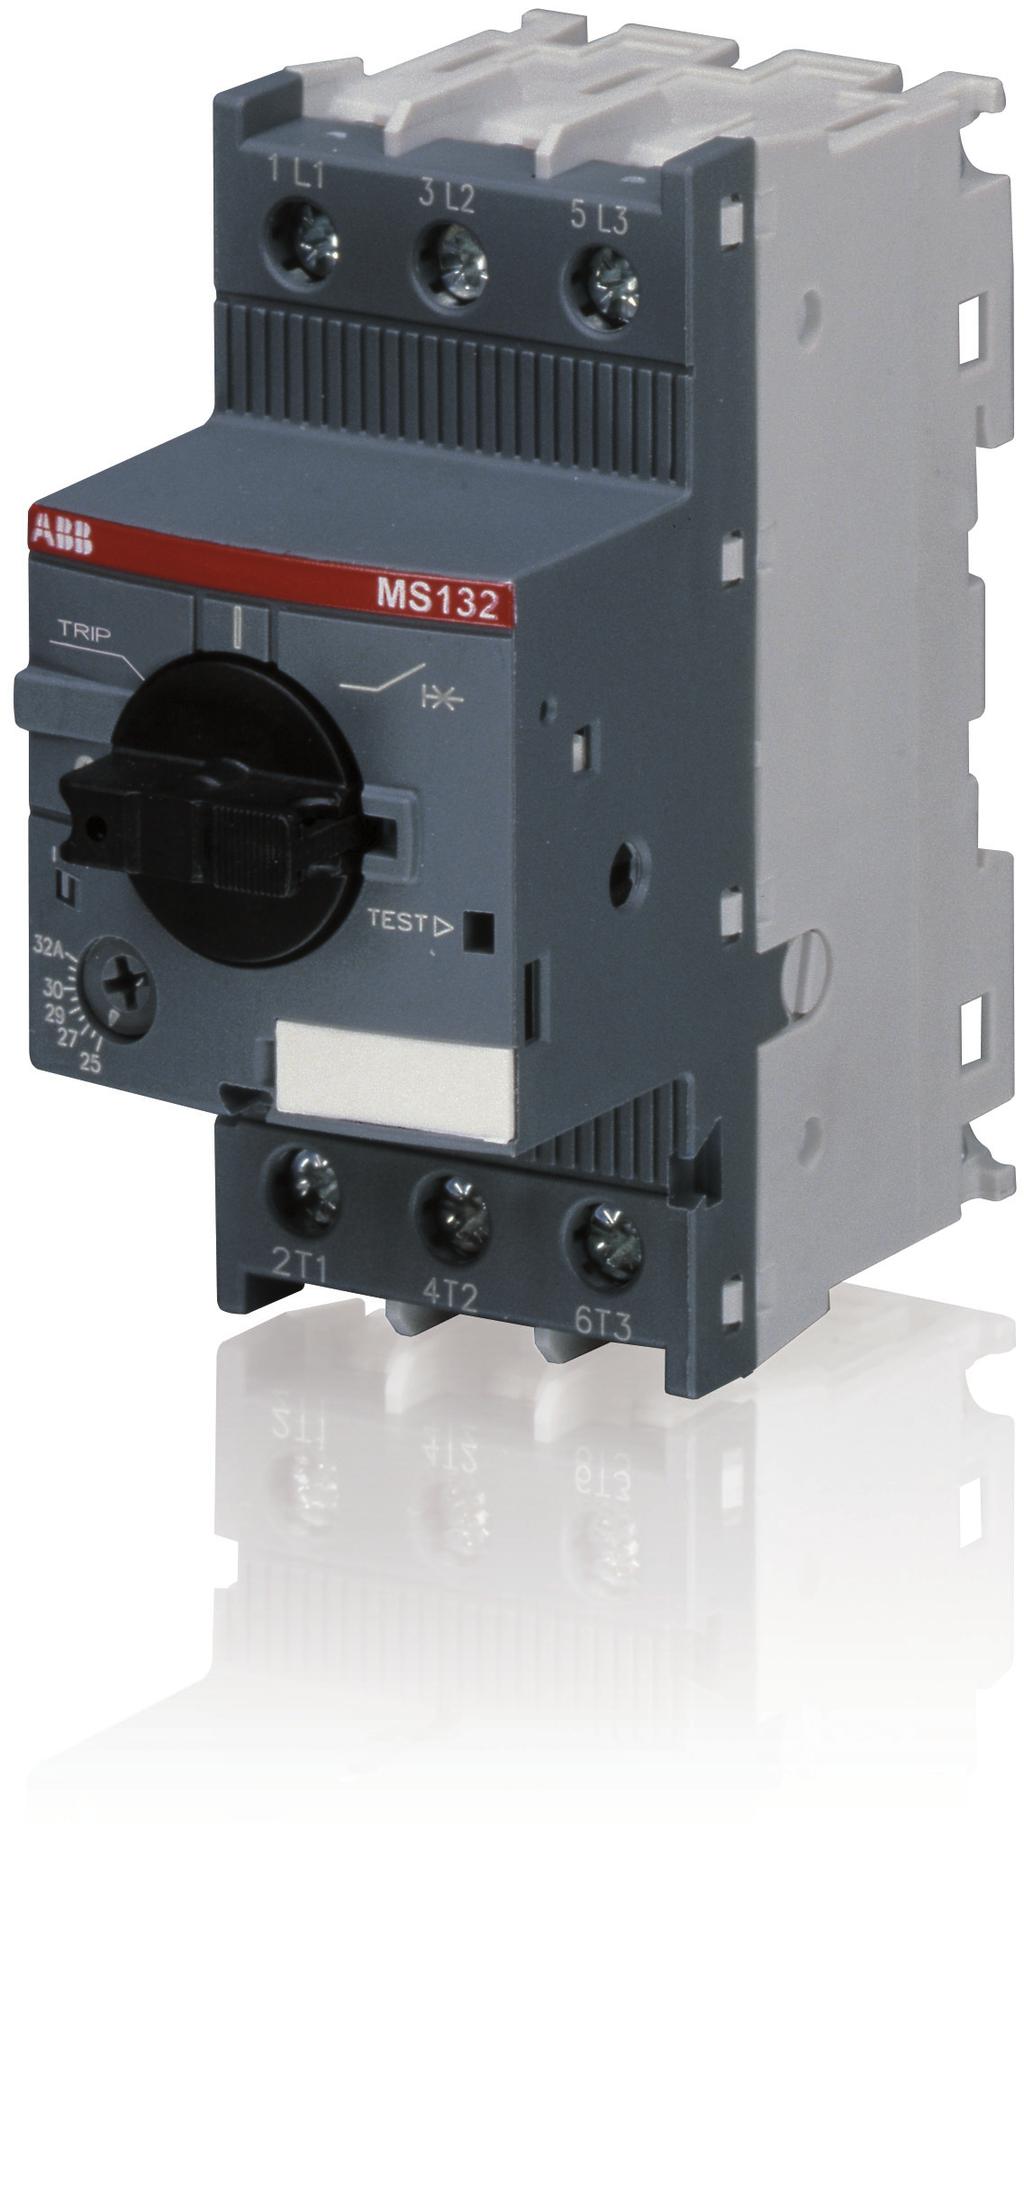 Data sheet Manual motor starter MS132 Manual motor starters are electromechanical protection devices for the main circuit.